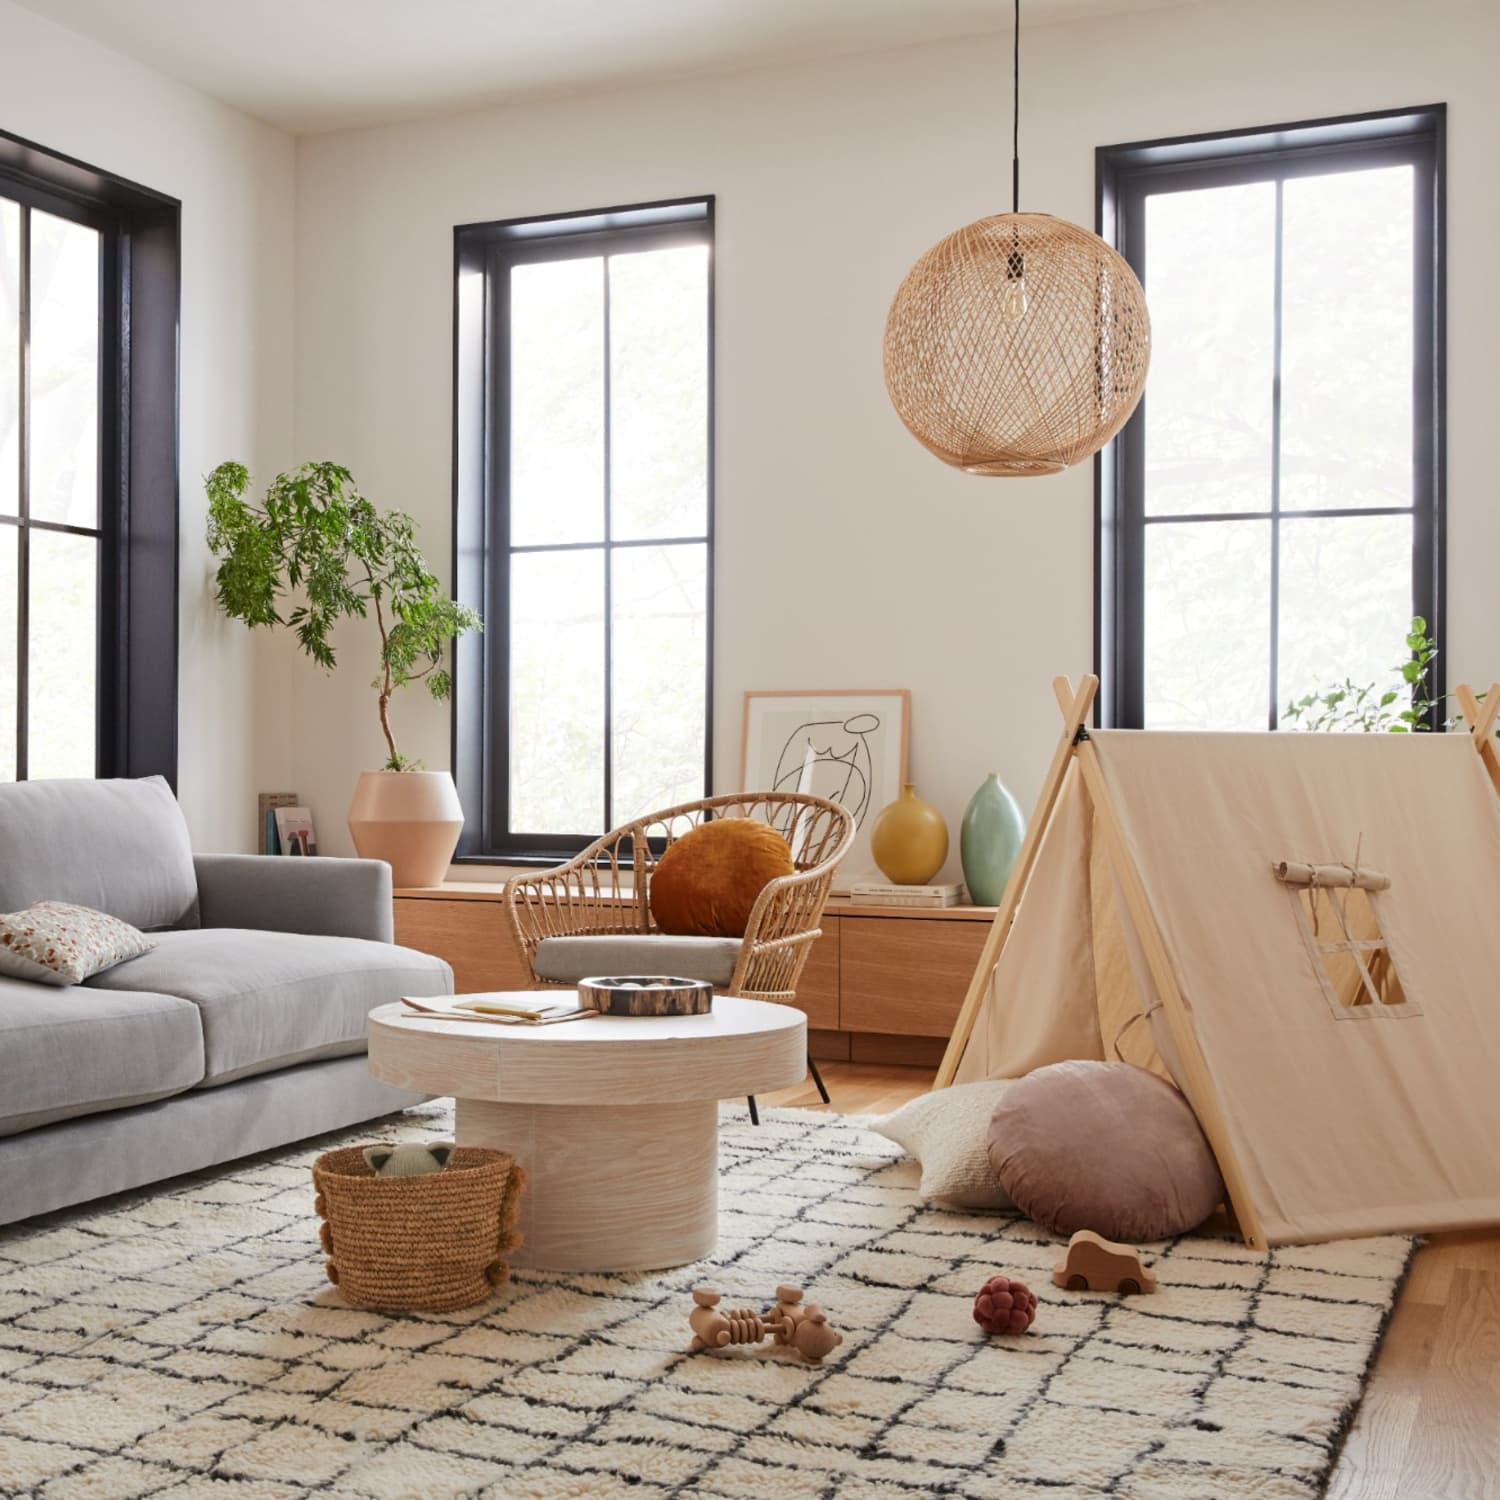 West Elm Is Launching a Children's Collection for Babies, Teens